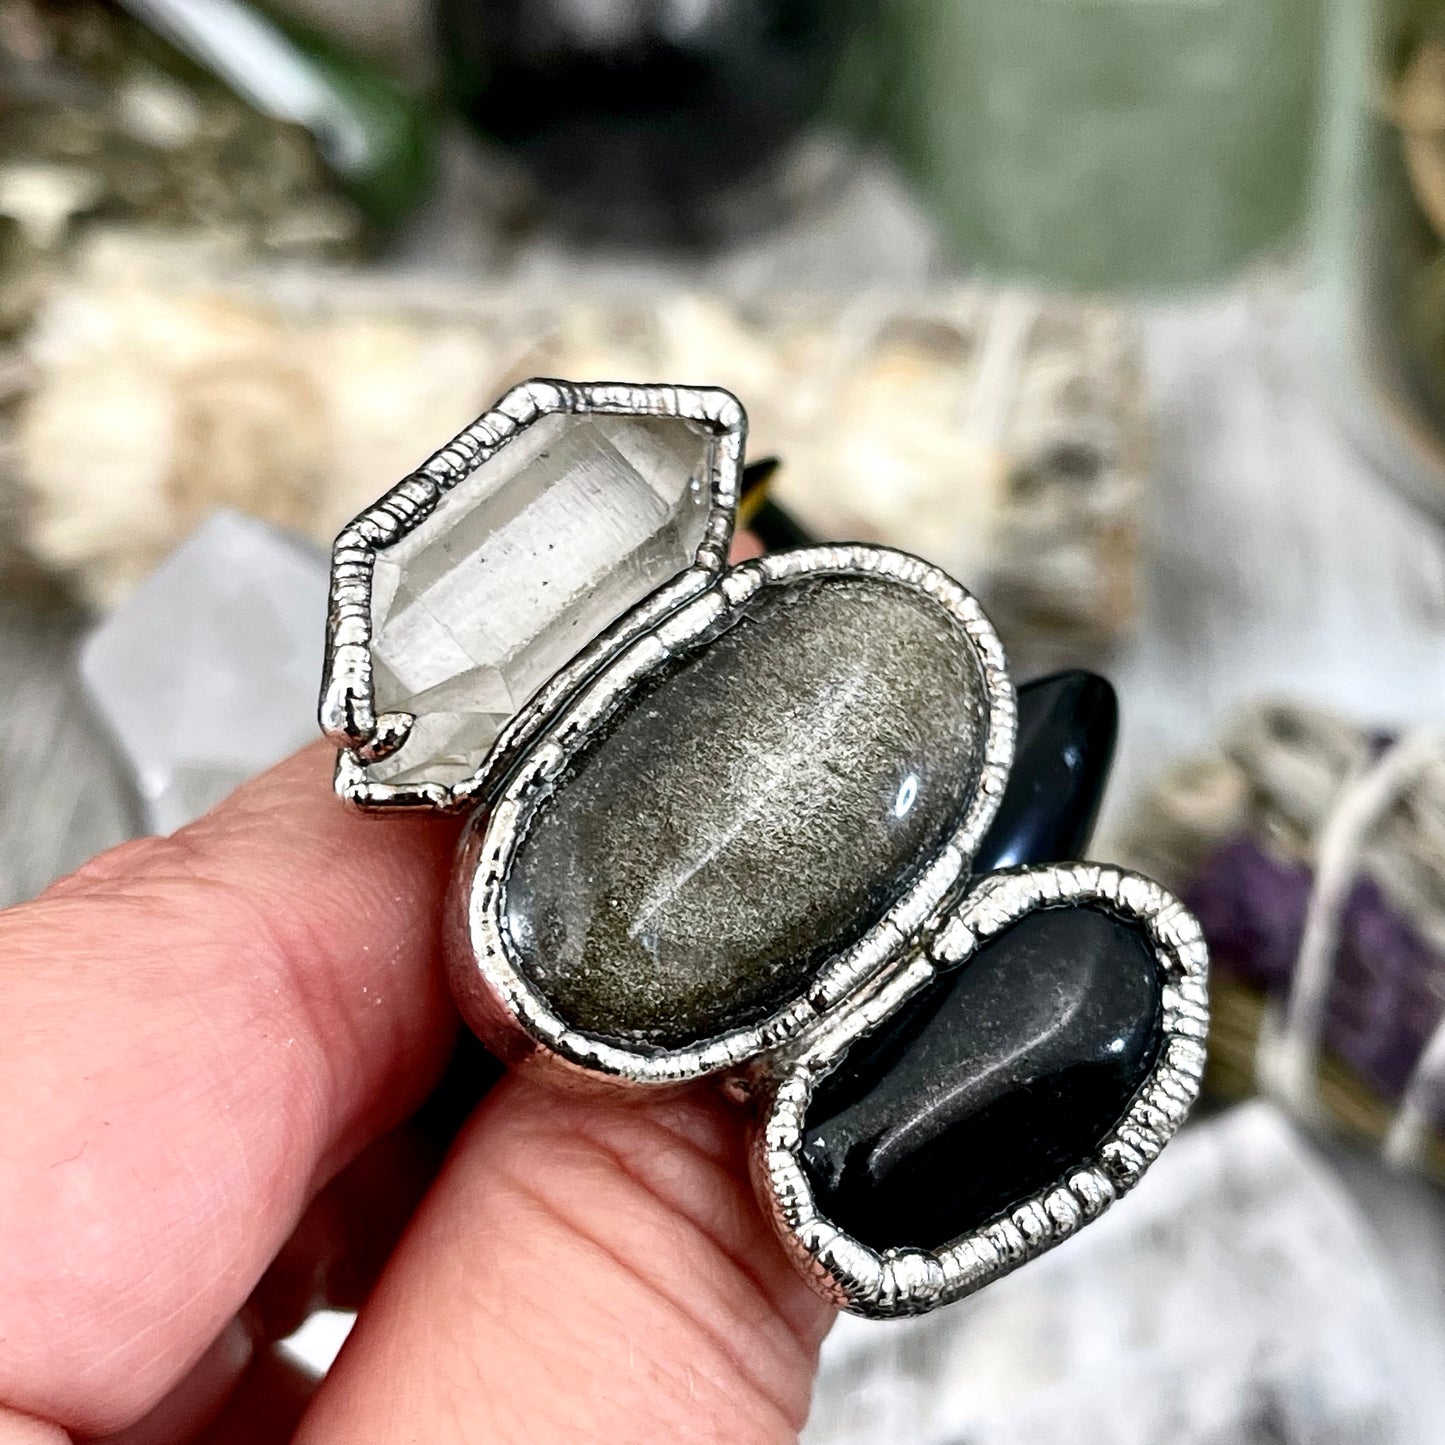 Size 7.5 Crystal Ring - Three Stone Ring Black Onyx Clear Quartz Silver Sheen Obsidian Ring / Foxlark Collection - One of a Kind